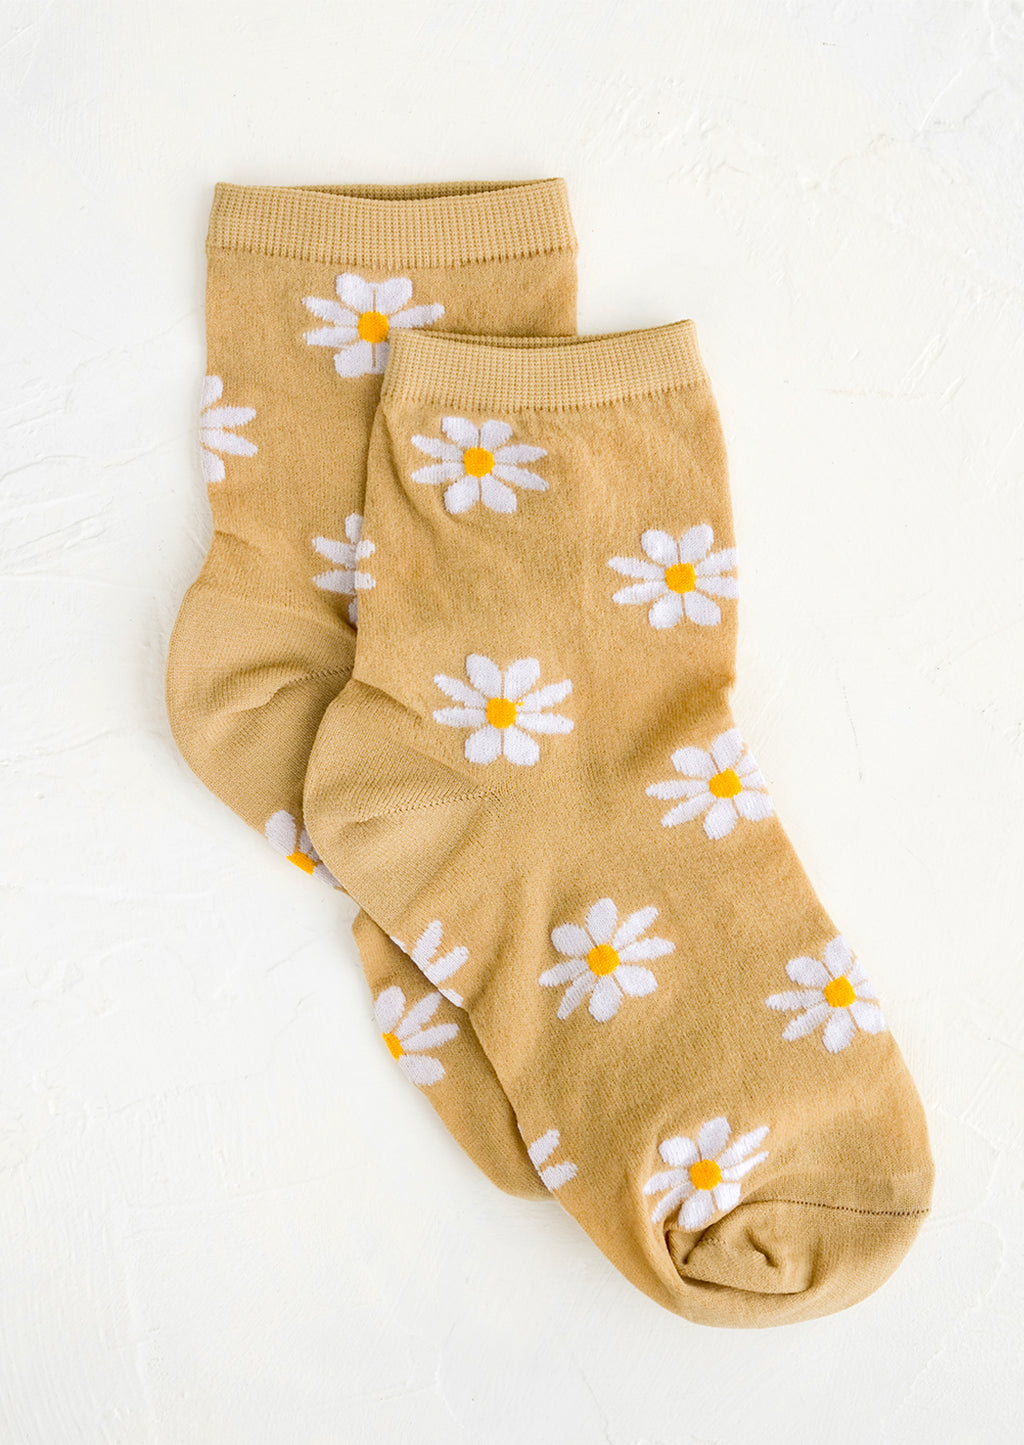 Tan: A pair of tan socks with white daisy pattern.